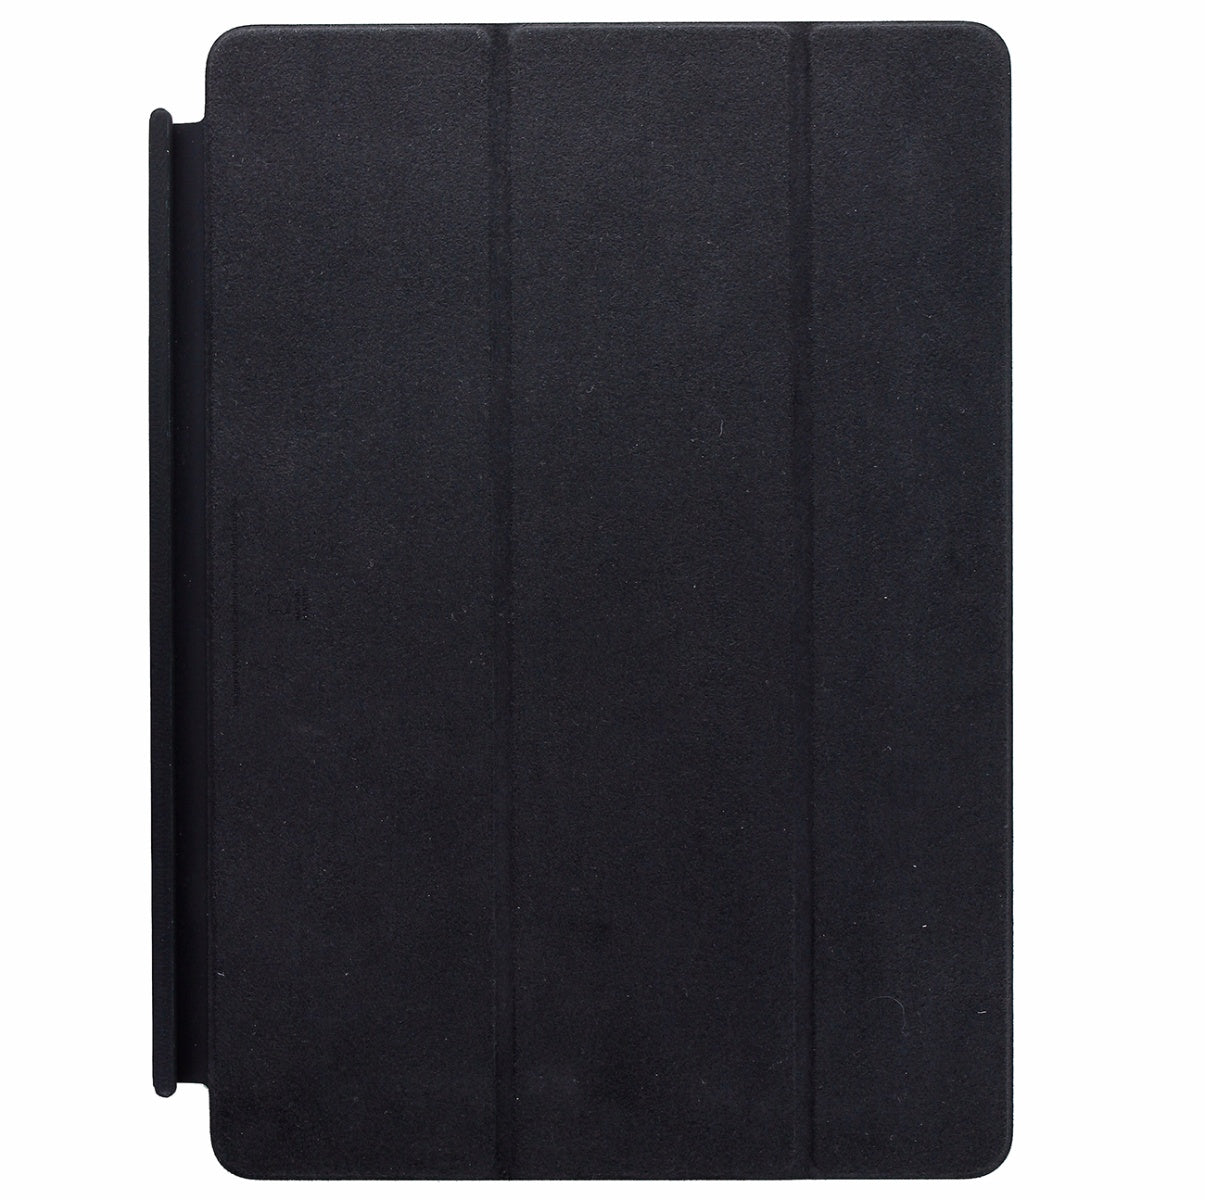 Official Apple Smart Cover for Apple iPad Pro 10.5 - Black / Leather MPUD2ZM/A iPad/Tablet Accessories - Cases, Covers, Keyboard Folios Apple    - Simple Cell Bulk Wholesale Pricing - USA Seller